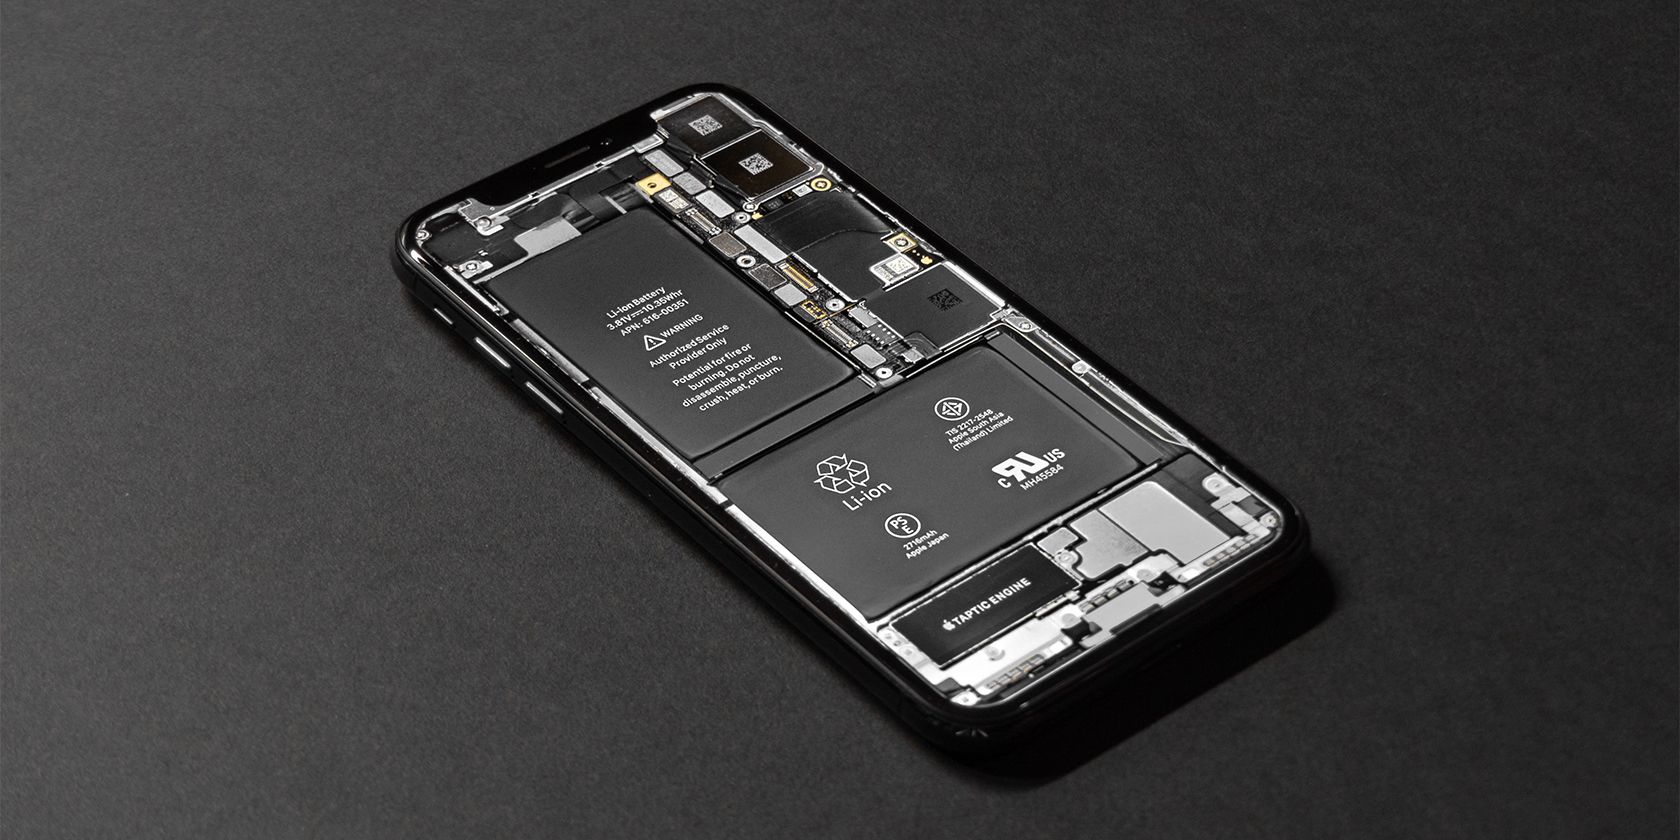 disassembled iPhone showing its batteries